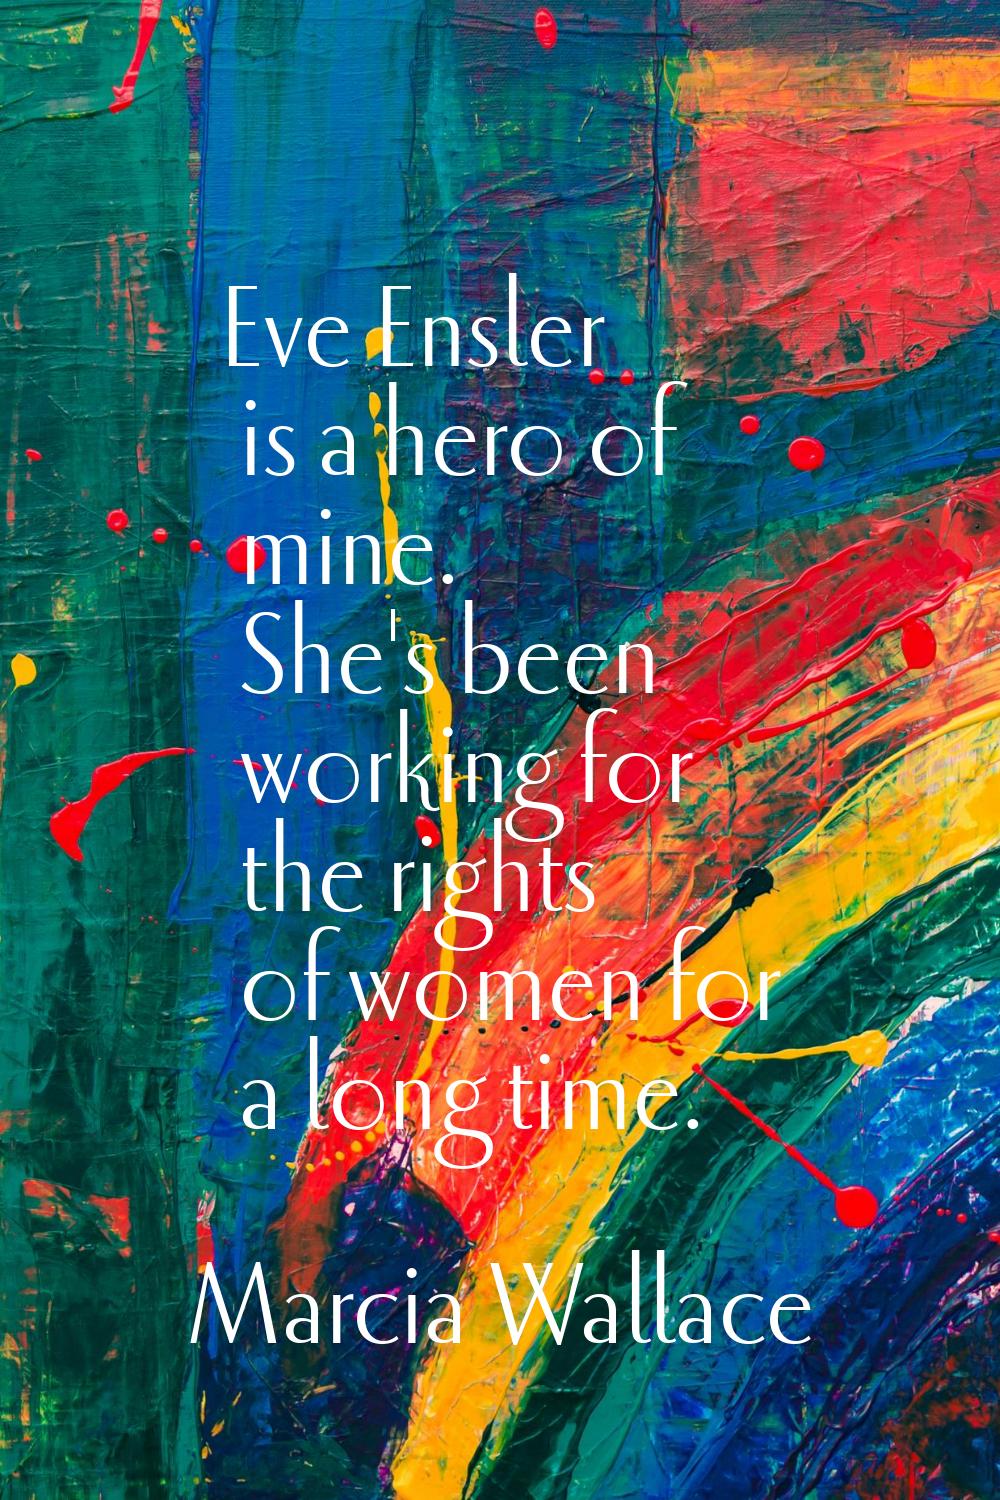 Eve Ensler is a hero of mine. She's been working for the rights of women for a long time.